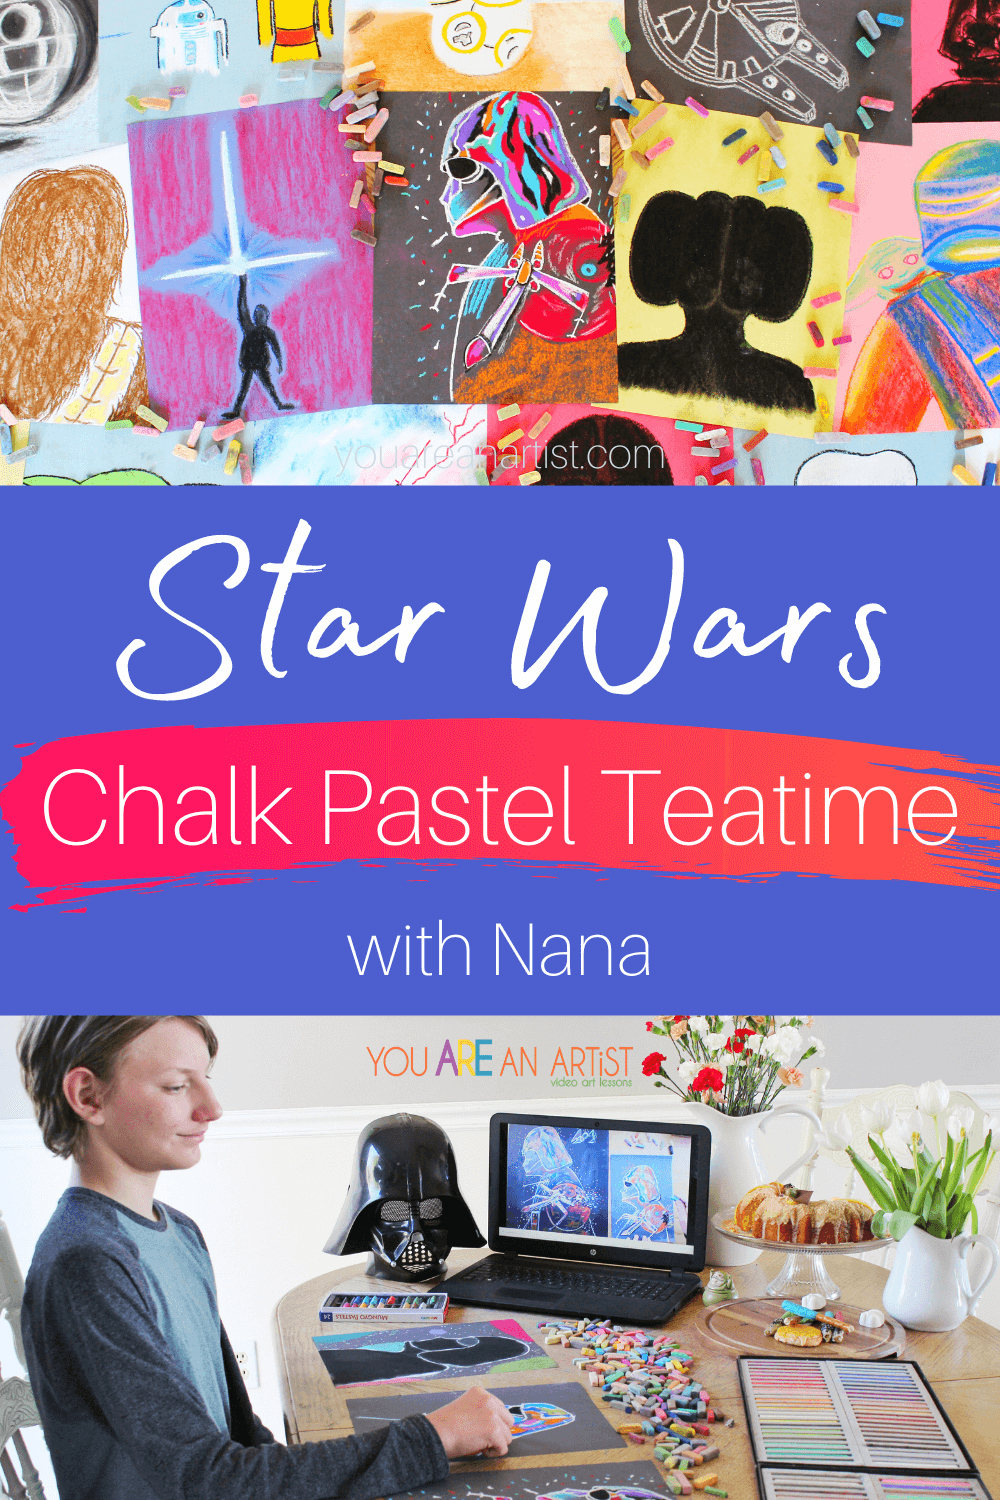 Star Wars Chalk Pastel Teatime with Nana: This fun Star Wars chalk pastel teatime with Nana is the perfect way to celebrate your kiddo's love for all things Star Wars! The Star Wars-themed lessons are super easy to follow and are ideal for all ages. All you need is a simple set of chalk pastels, construction paper, and Nana's video art lessons! Add in some tasty treats, and you have a teatime even a Wookie would love! #Star Wars #Maythe4th #StarWarsartforkids #StarWarschalkpastels #StarWarschalkpastelteatime #StarWarschalkpastellessons #Chalkpastelsatthemovies #YouAReAnArtistClubhouse